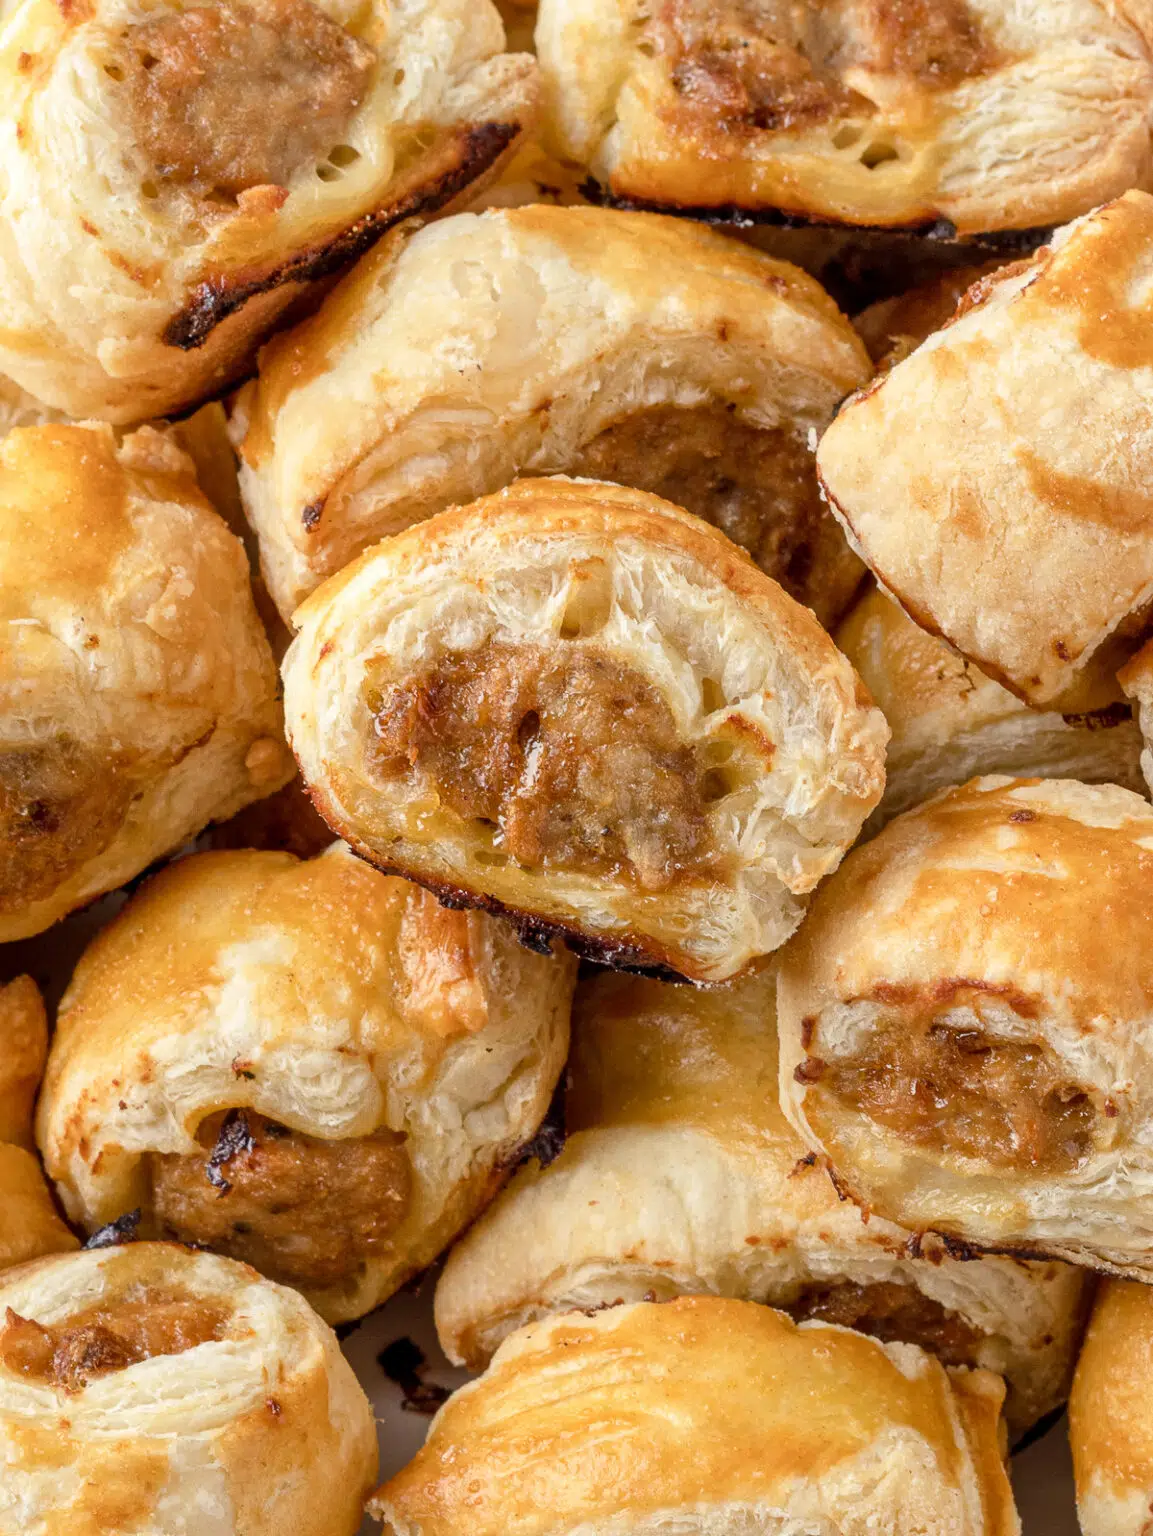 Close up of the flaky puff pastry layers and chicken sausage filling in these delicious baked chicken sausage rolls.